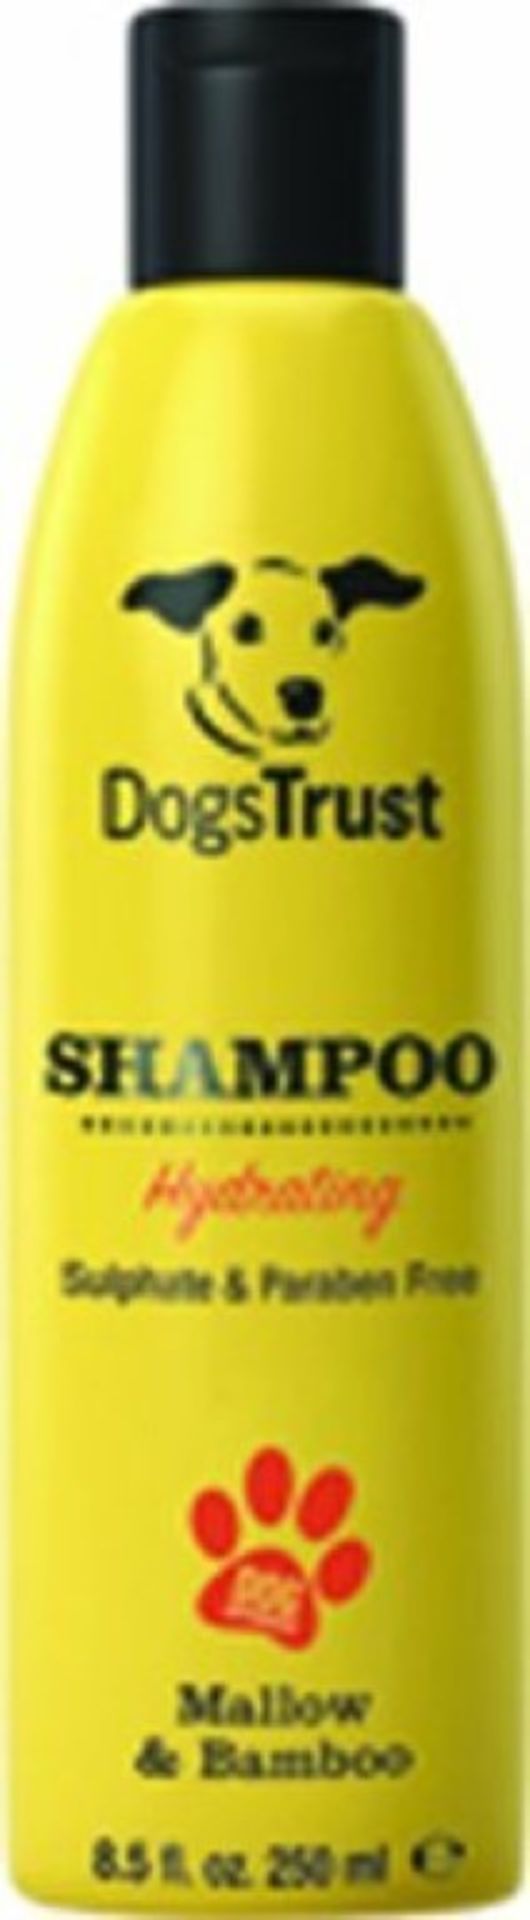 60 x Various Dogs Trust Shampoos and Conditioners - Brand New Stock - CL028 - Includes No Tears, - Image 5 of 15